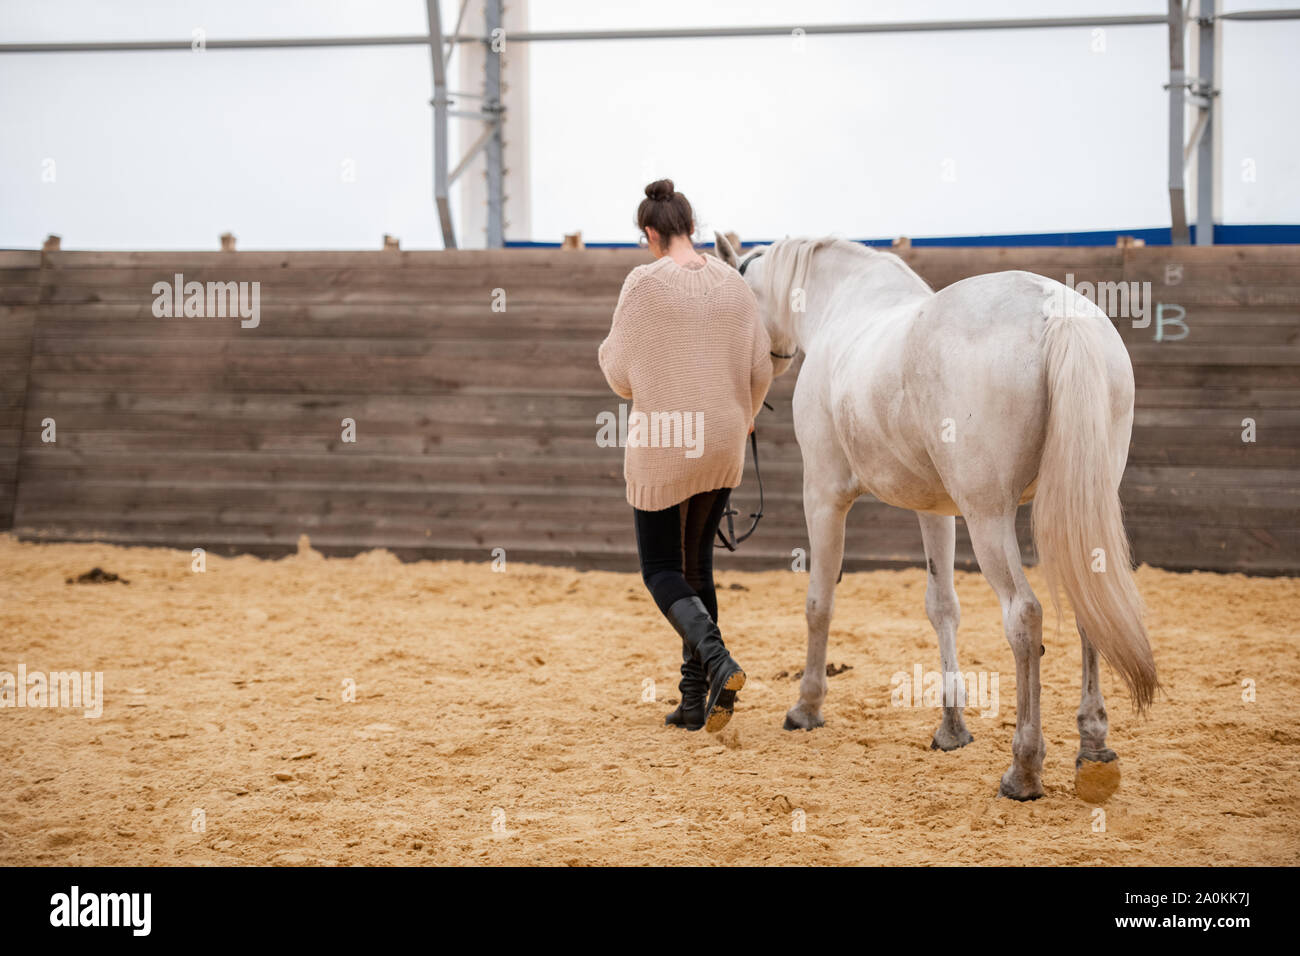 Young woman holding bridles of white racehorse while moving down sandy arena Stock Photo